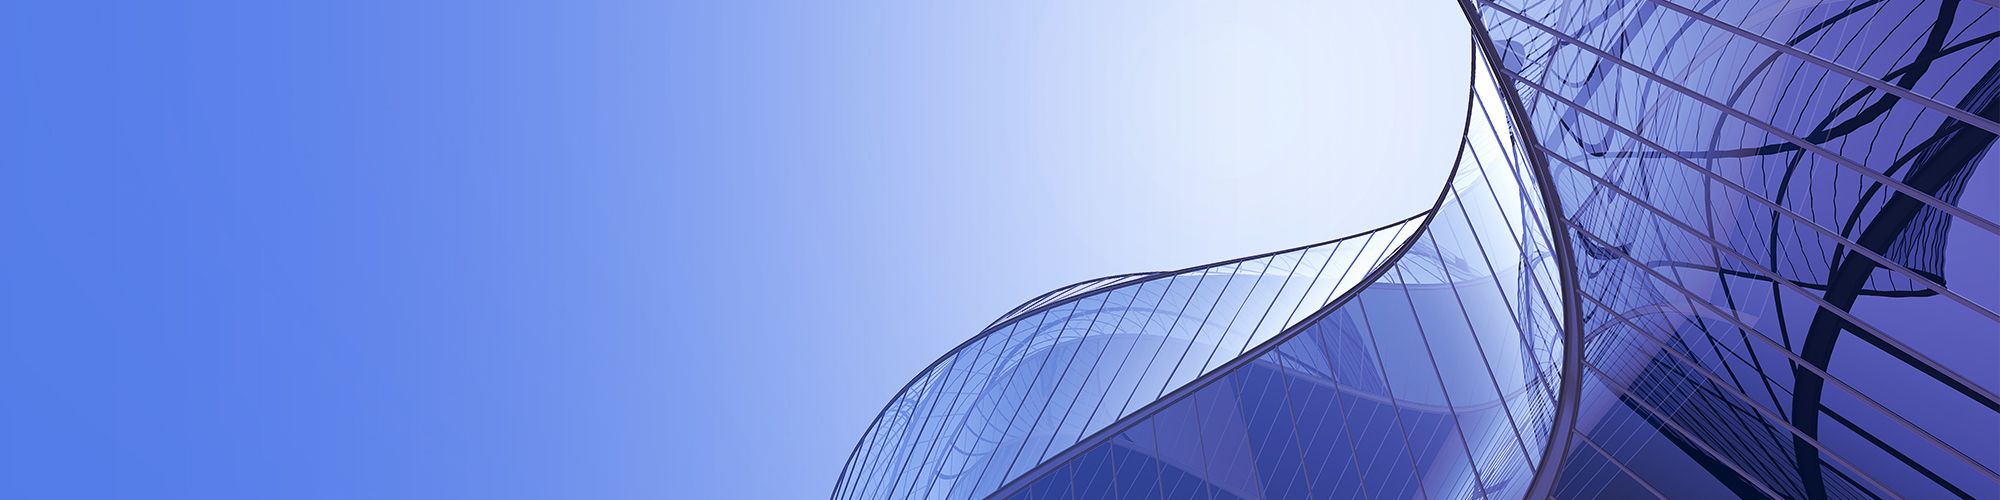 wavy windows of a building banner image